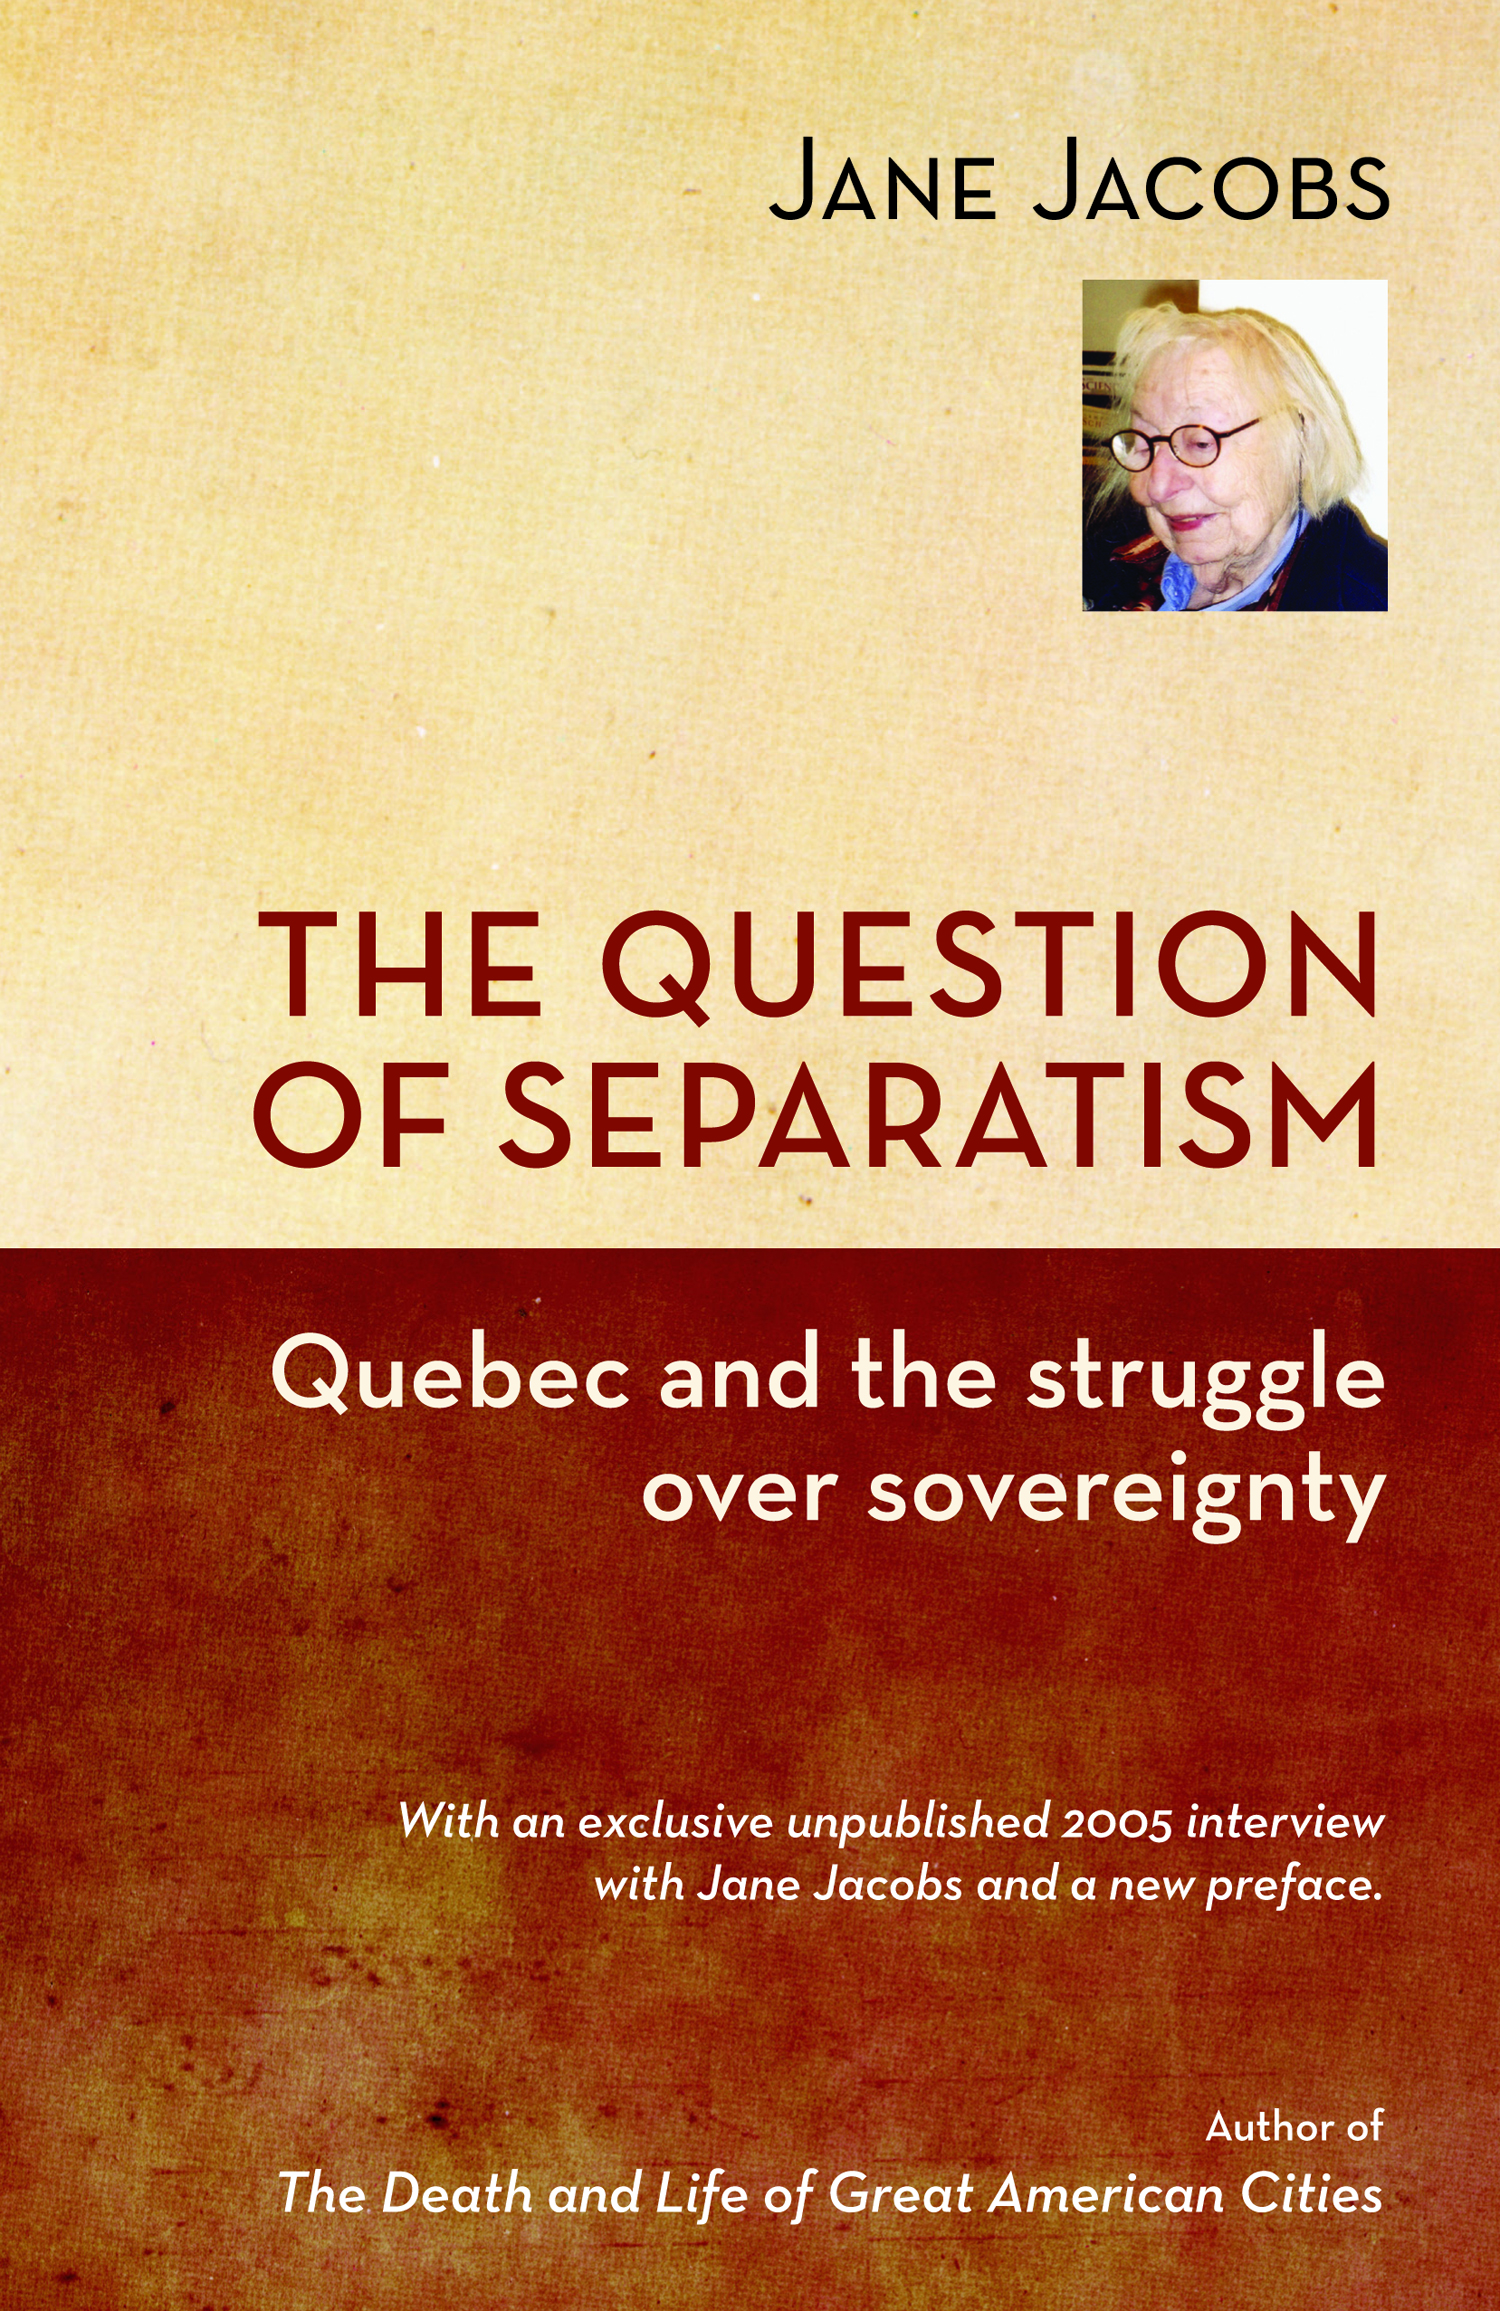 The cover of The Question of Separatism